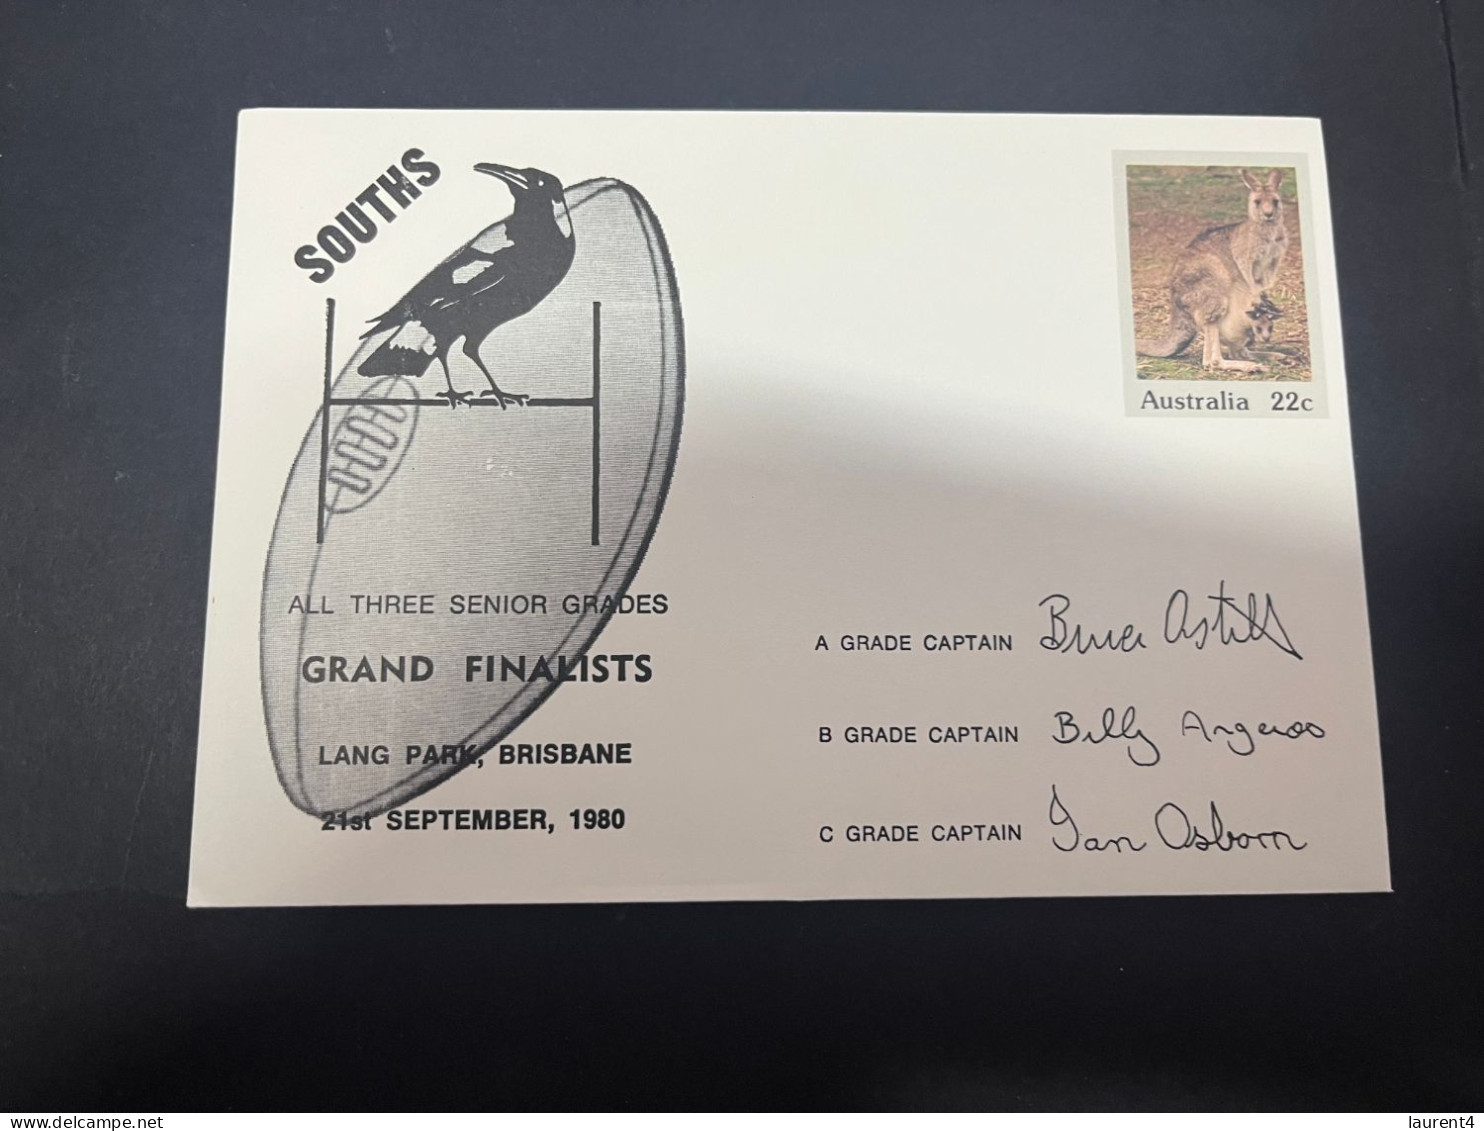 1-5-2023 (3 Z 39) Australia FDC (1 Covers) 1980 - OZ Football - South (magpies) Grand Finalists (signed - Kangaroo) - FDC